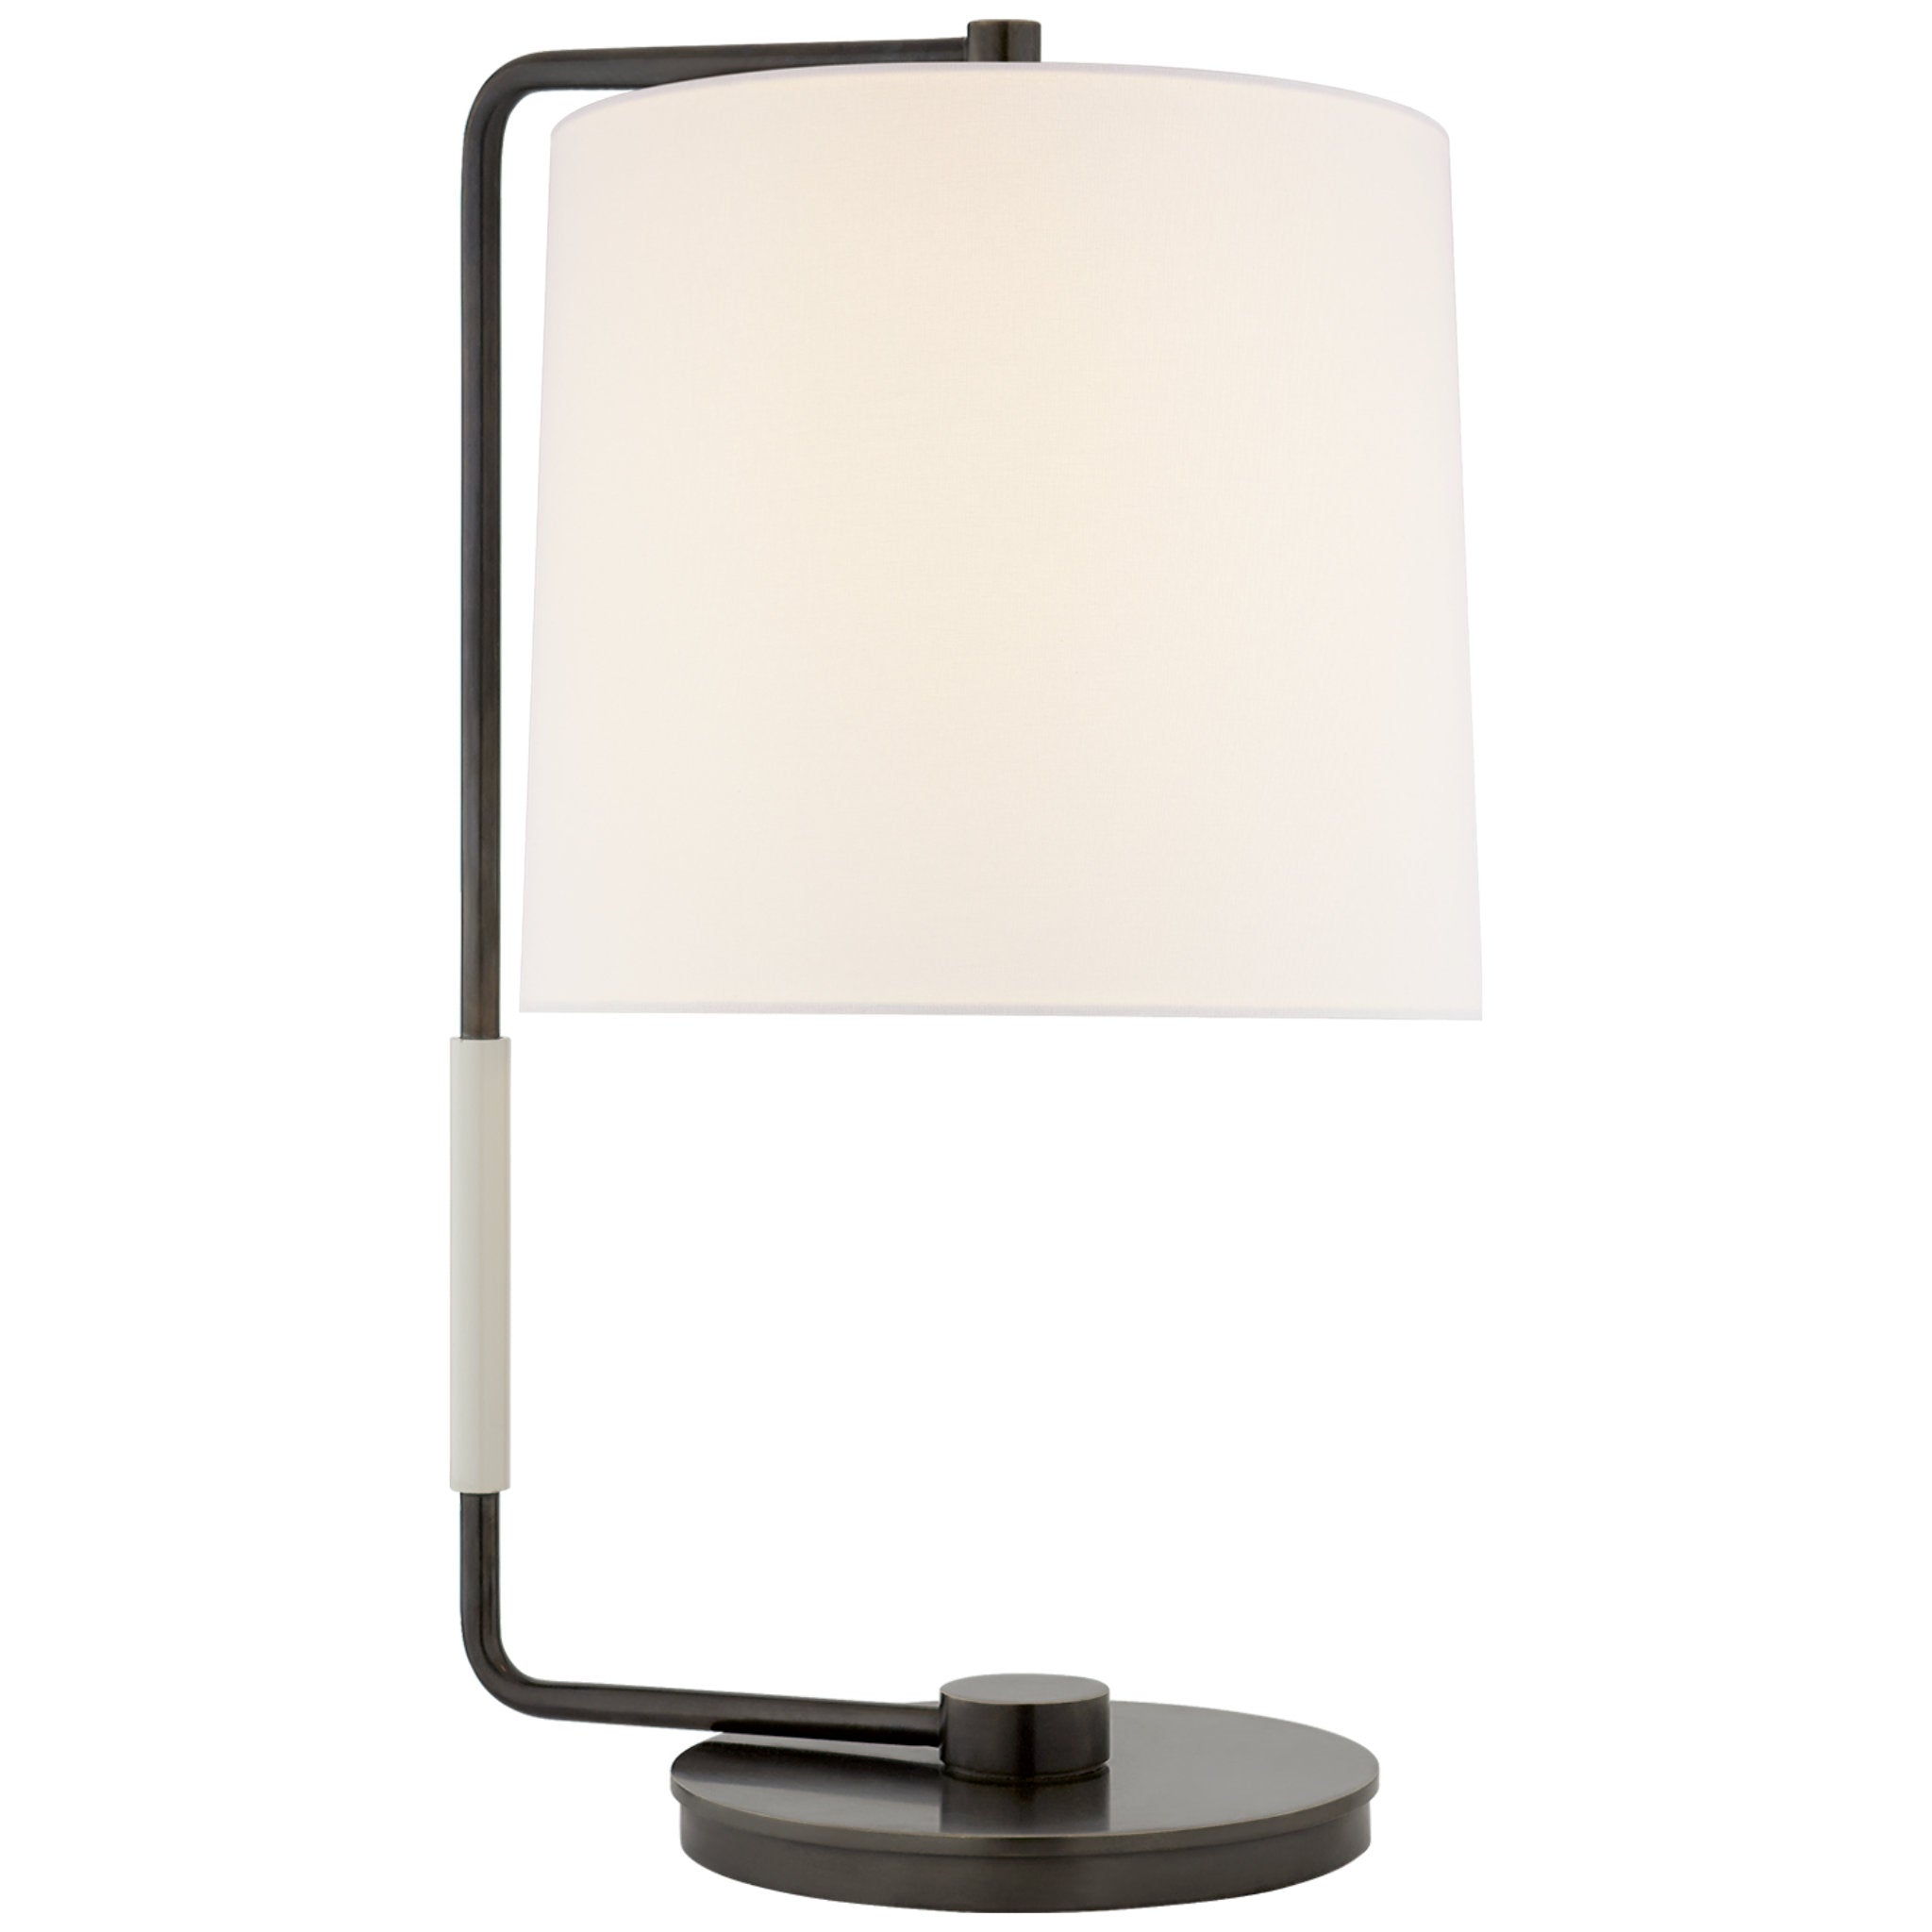 Barbara Barry Swing Table Lamp in Bronze with Linen Shade